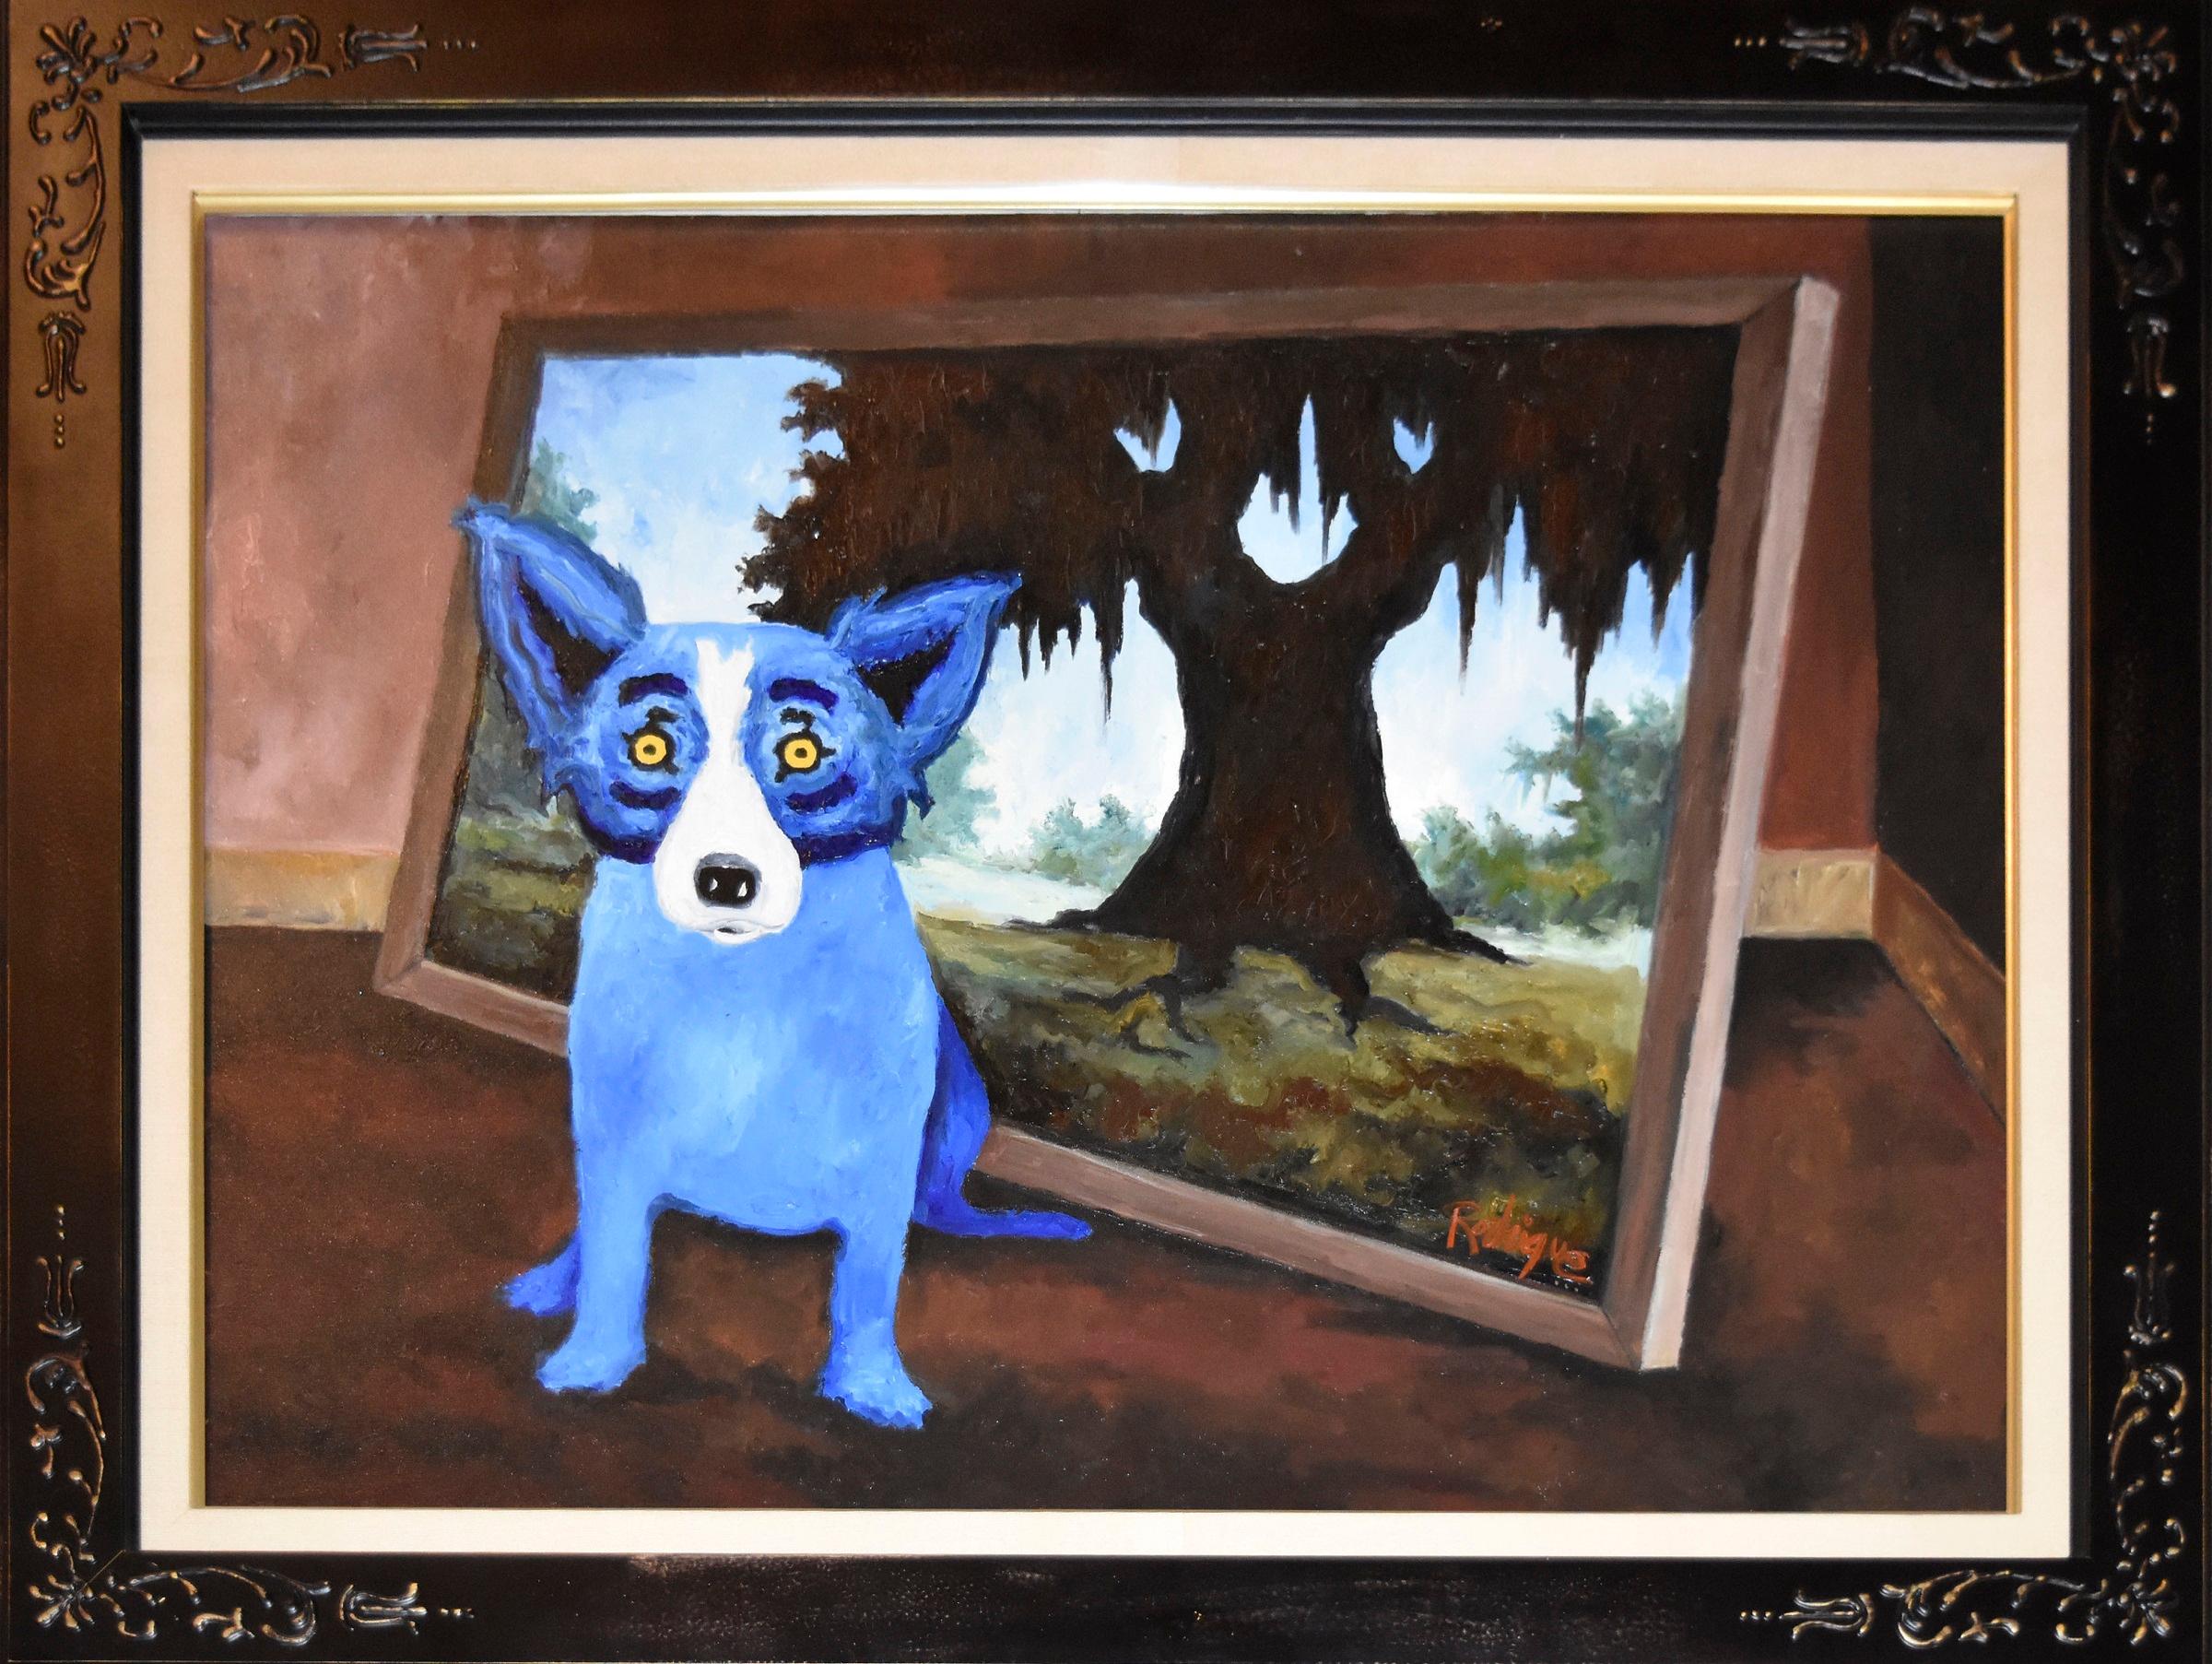 George Rodrigue Animal Painting - Blue Dog "I Remember This" Original Oil on Canvas